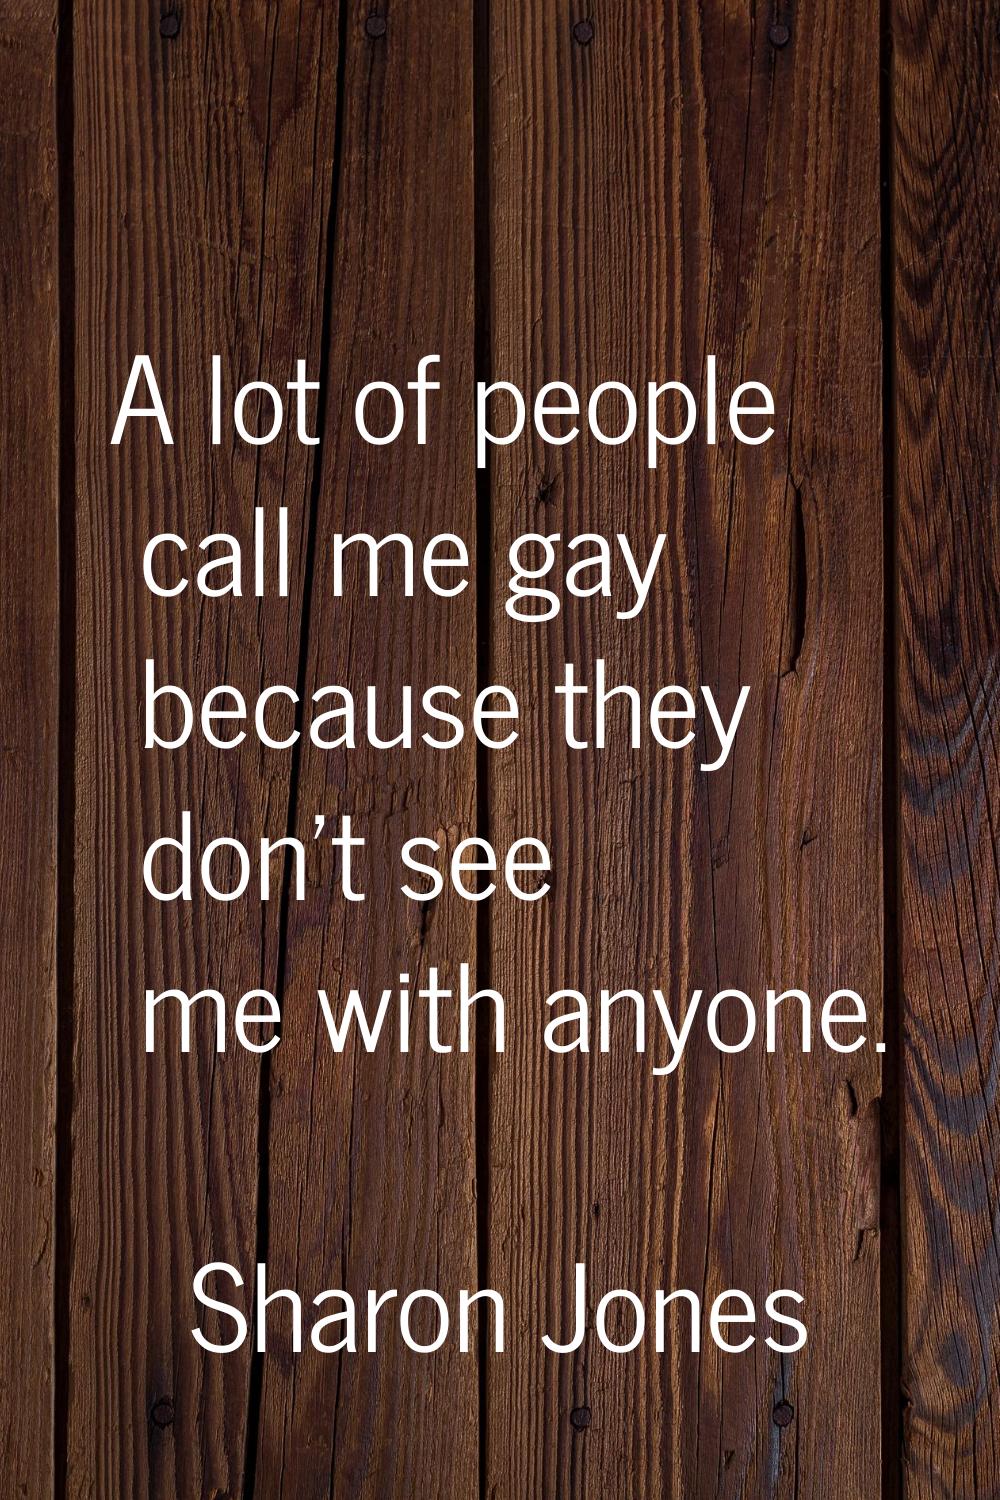 A lot of people call me gay because they don't see me with anyone.